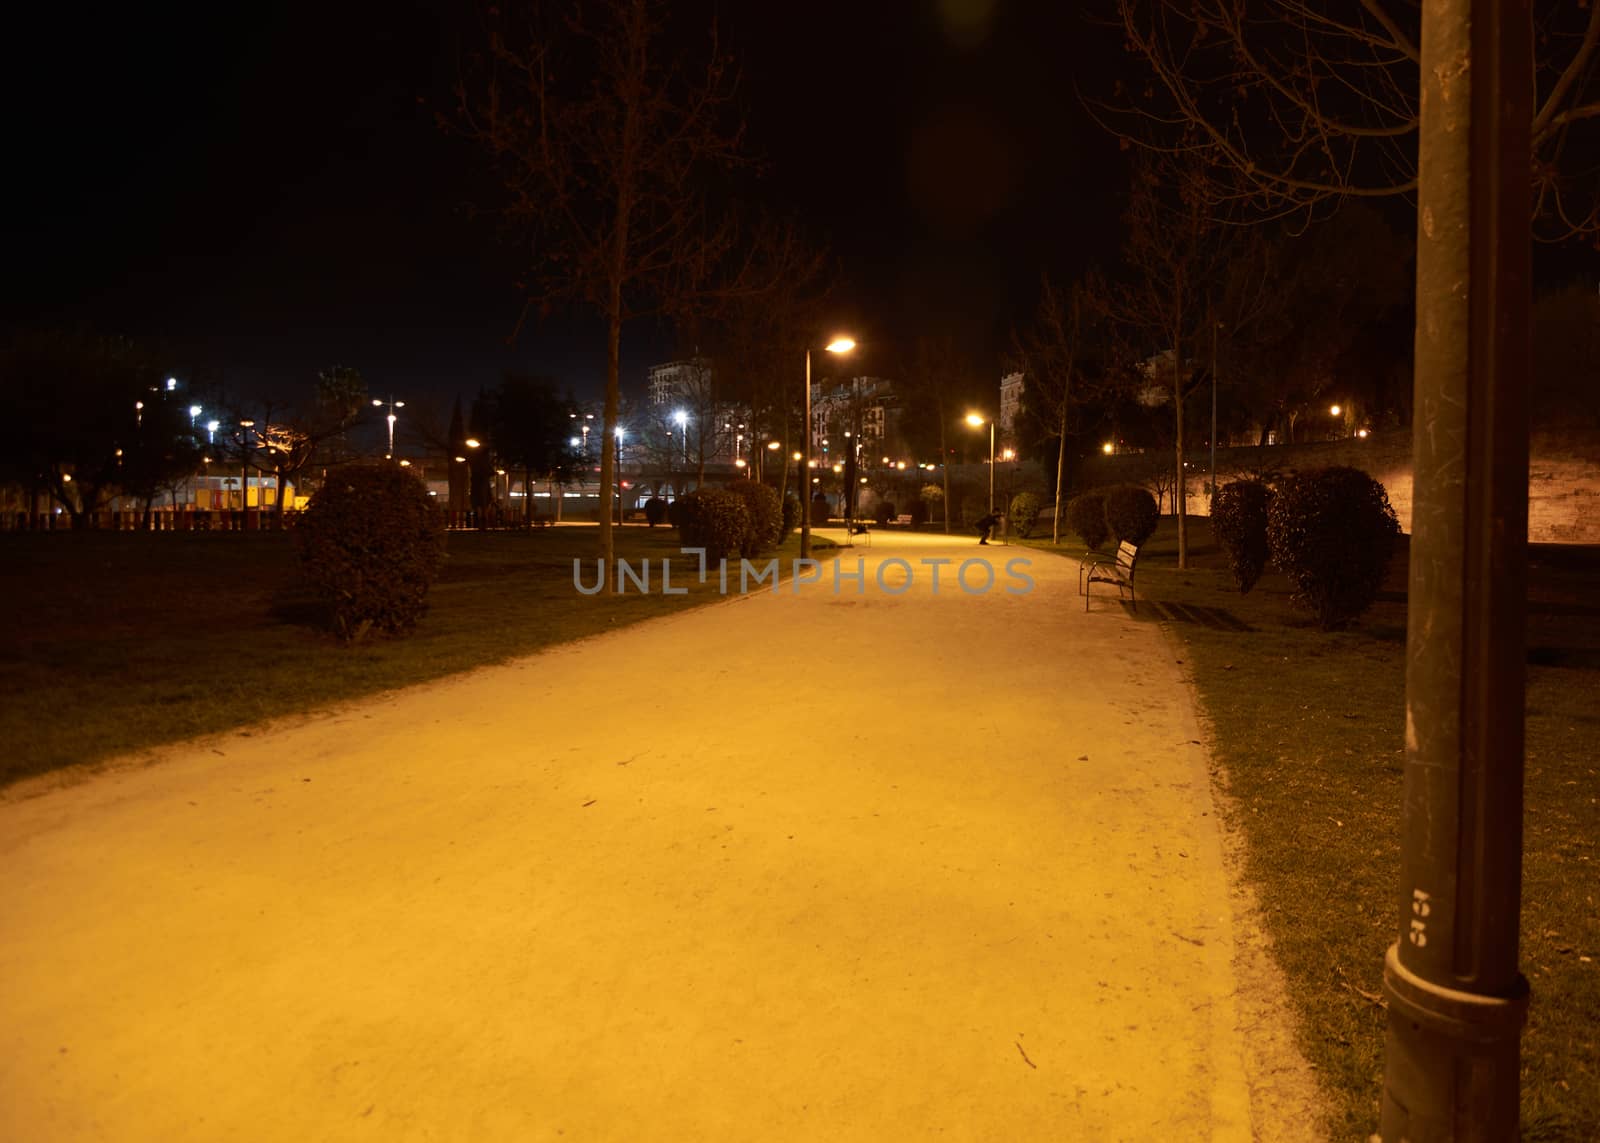 I walk in the park to nowhere at night by raul_ruiz